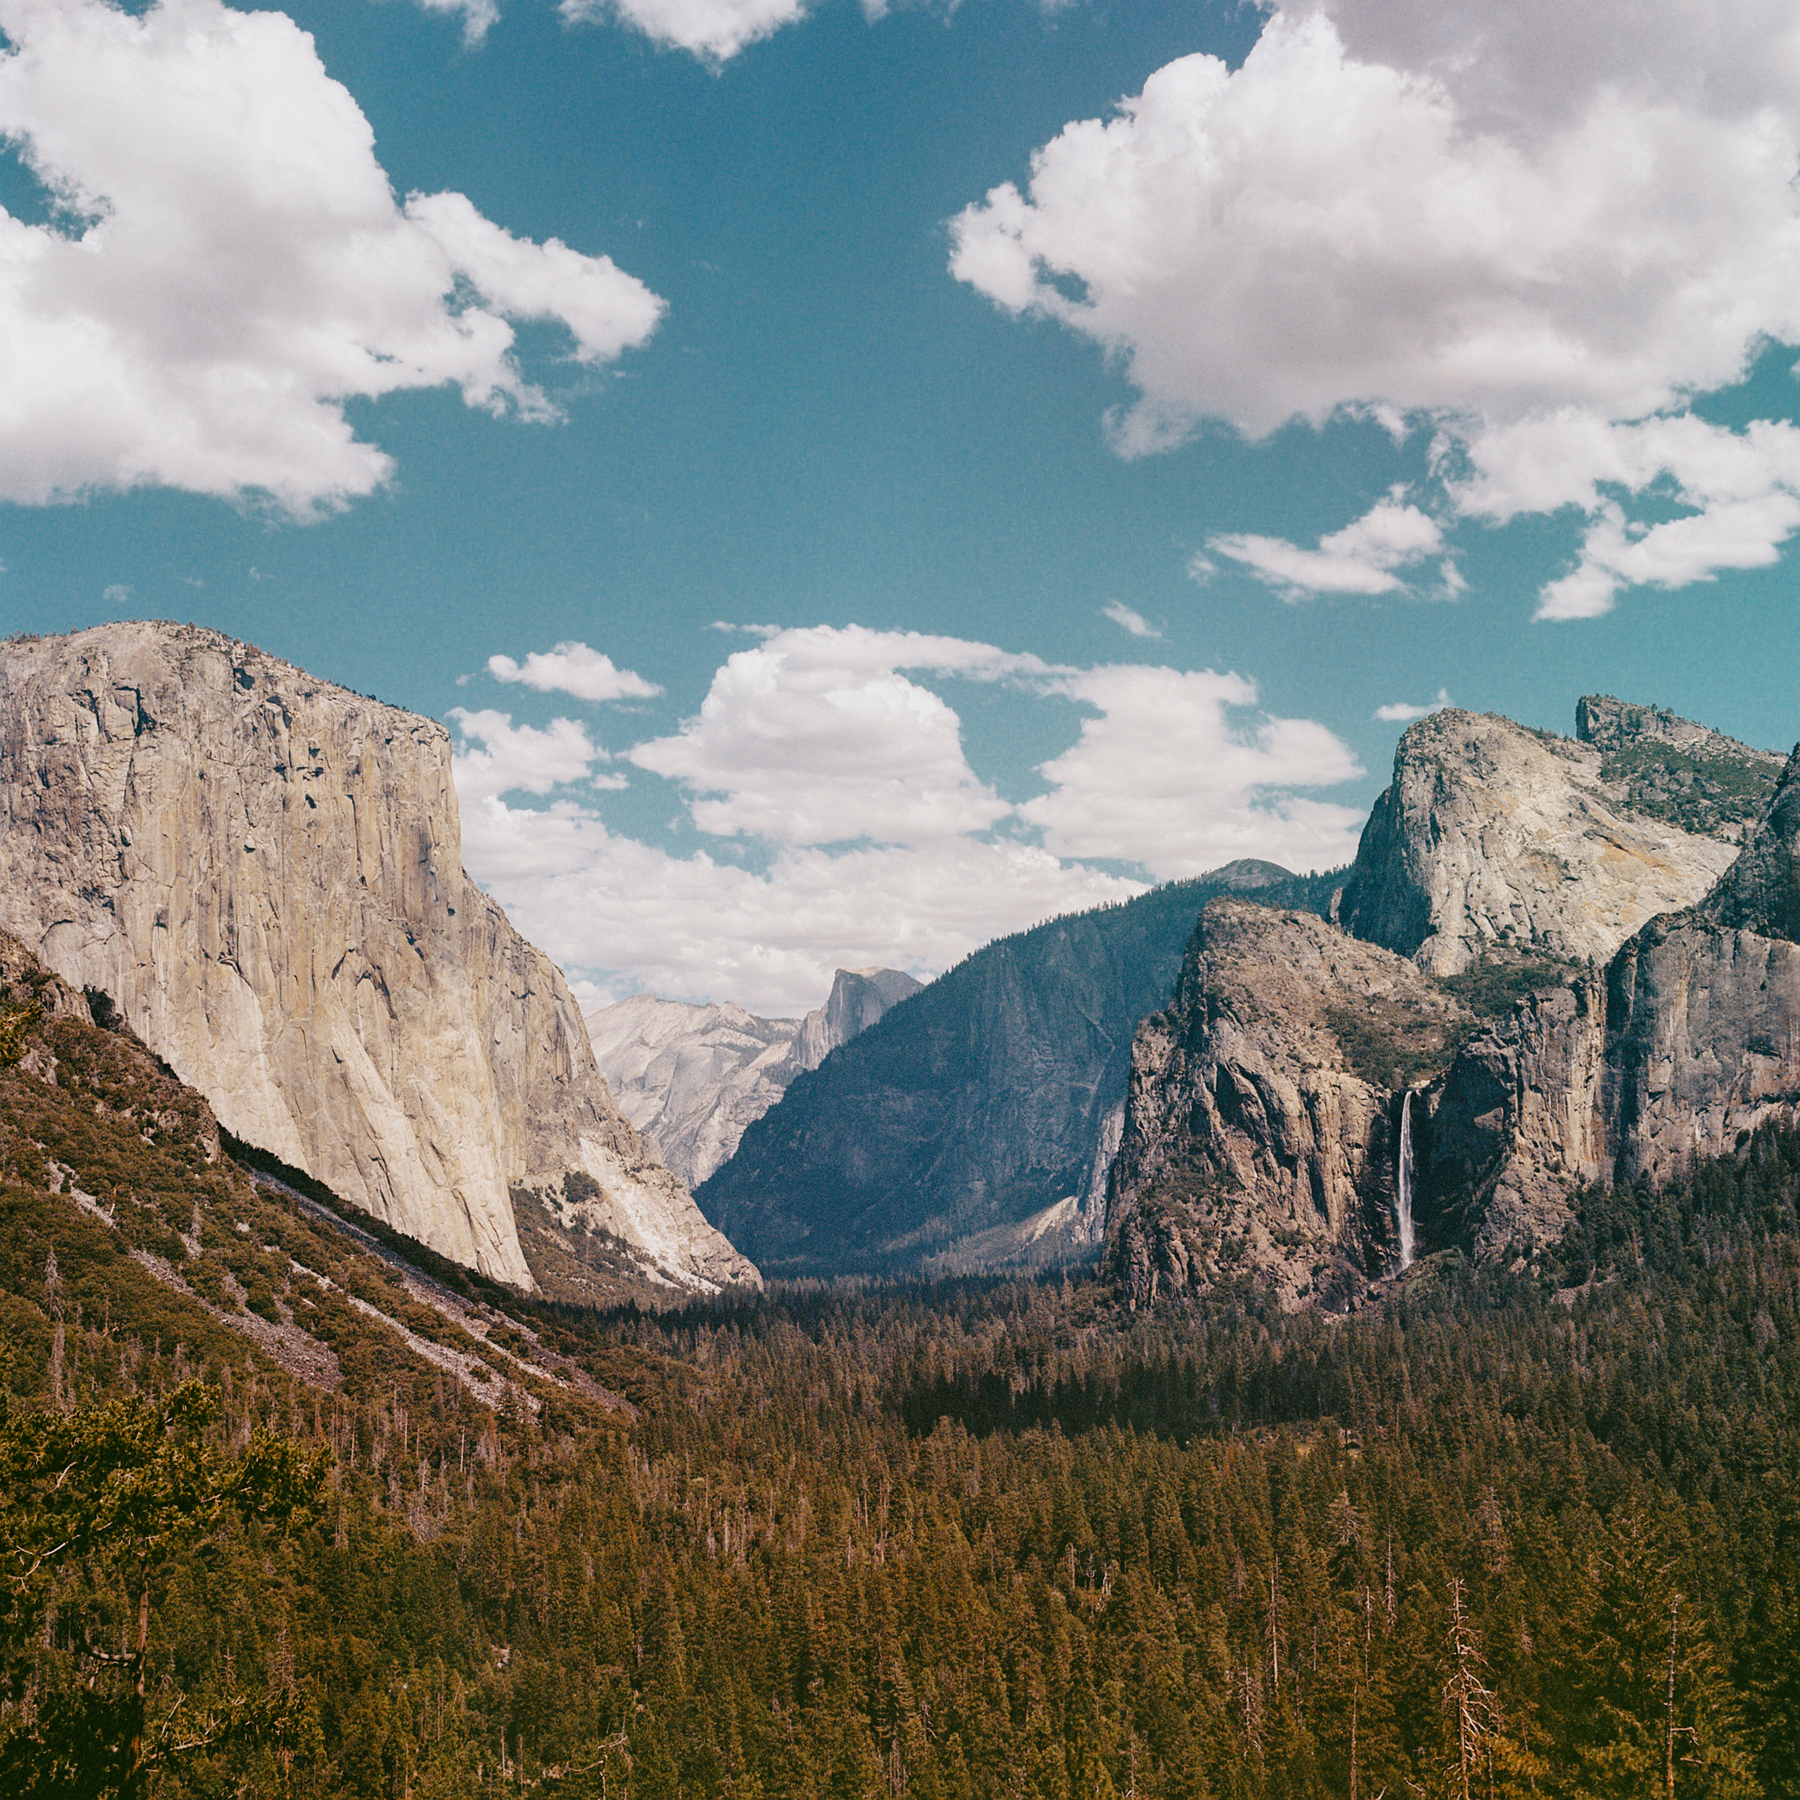 a scan of a color negative of a medium format photo. photo is of the Yosemite peaks from tunnel view, showing the peaks in the background and some trees in the foreground